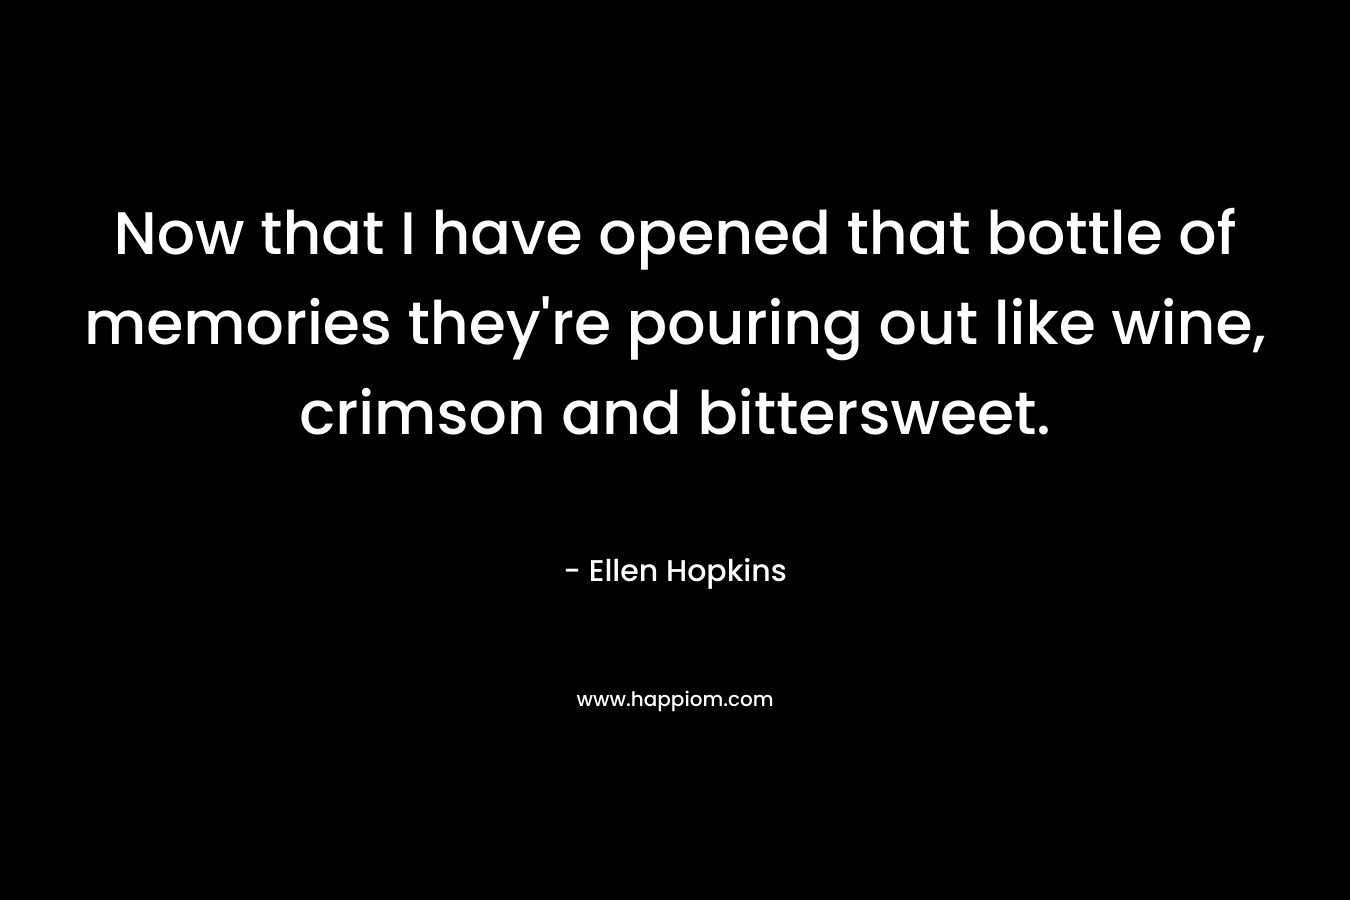 Now that I have opened that bottle of memories they’re pouring out like wine, crimson and bittersweet. – Ellen Hopkins